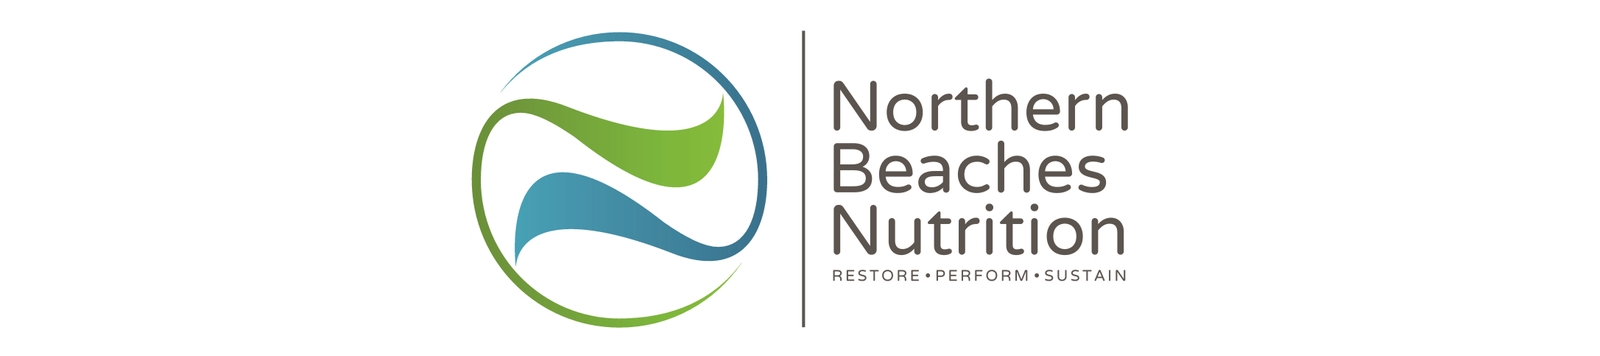 Northern Beaches Nutrition